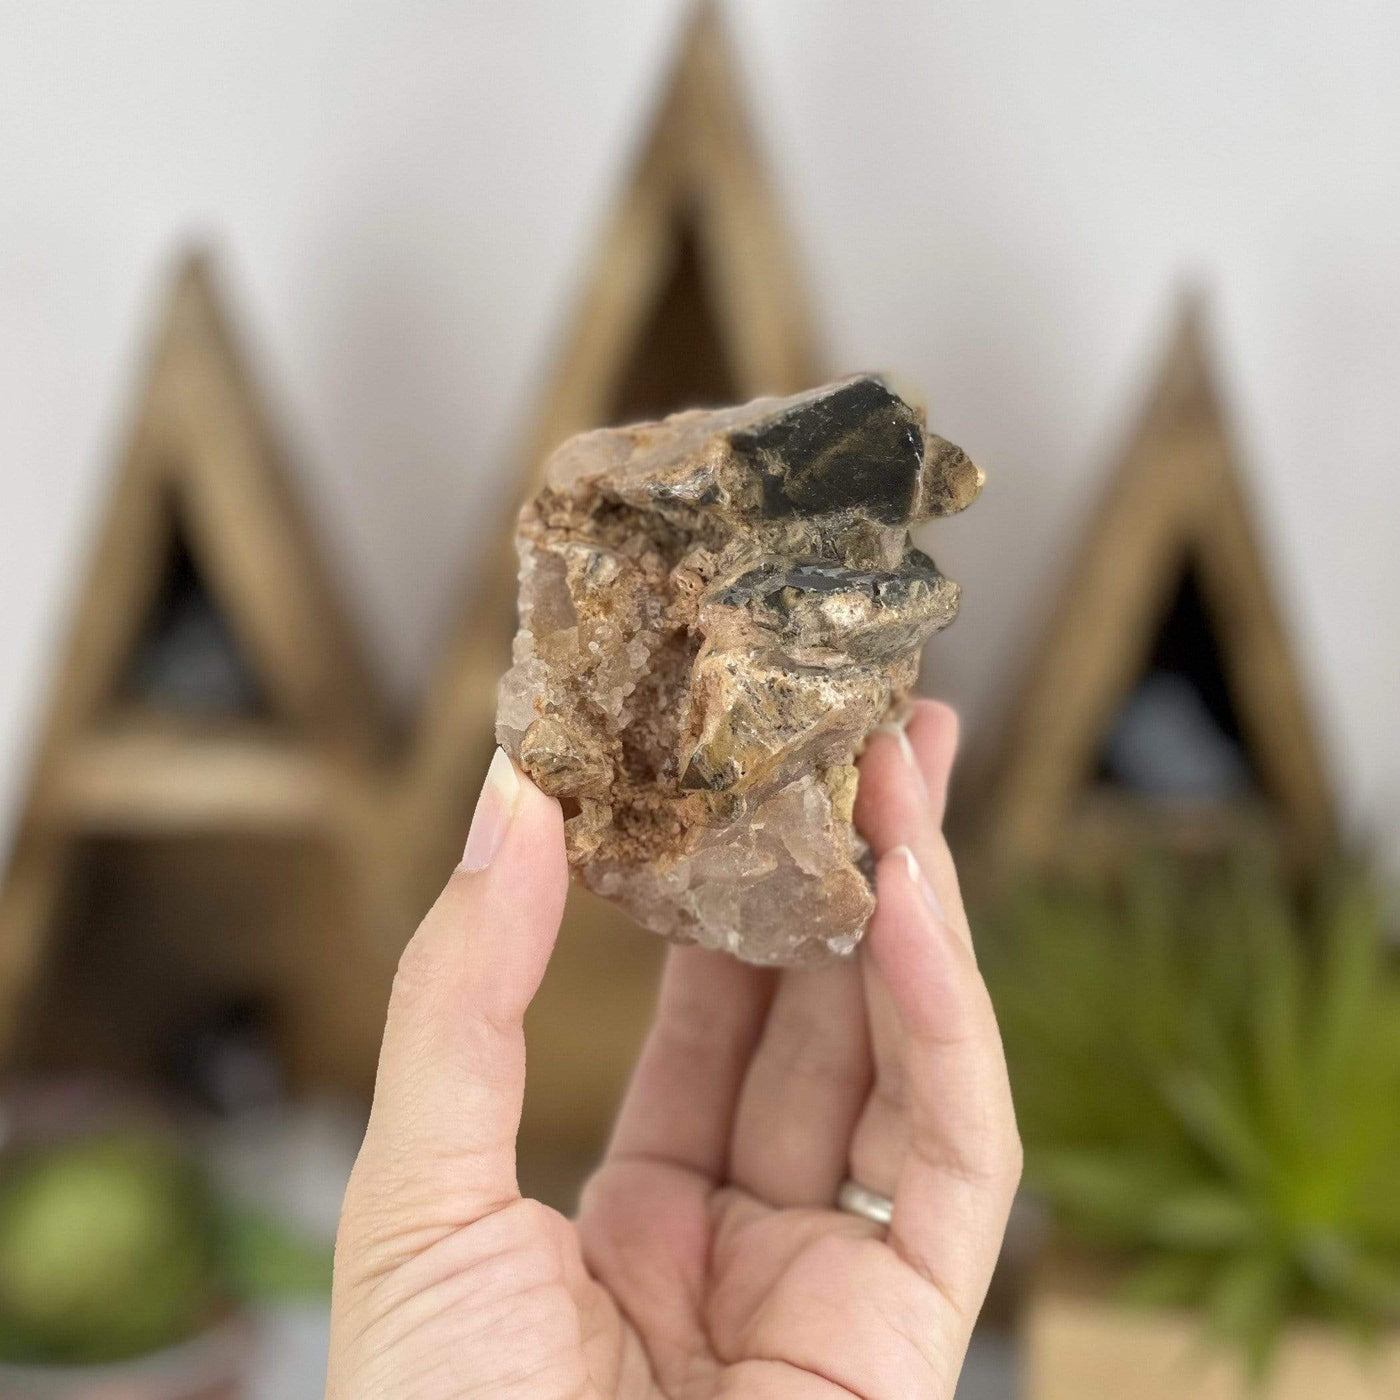 hand holding up Tumbled Lodolite Specimen with decorations in the background